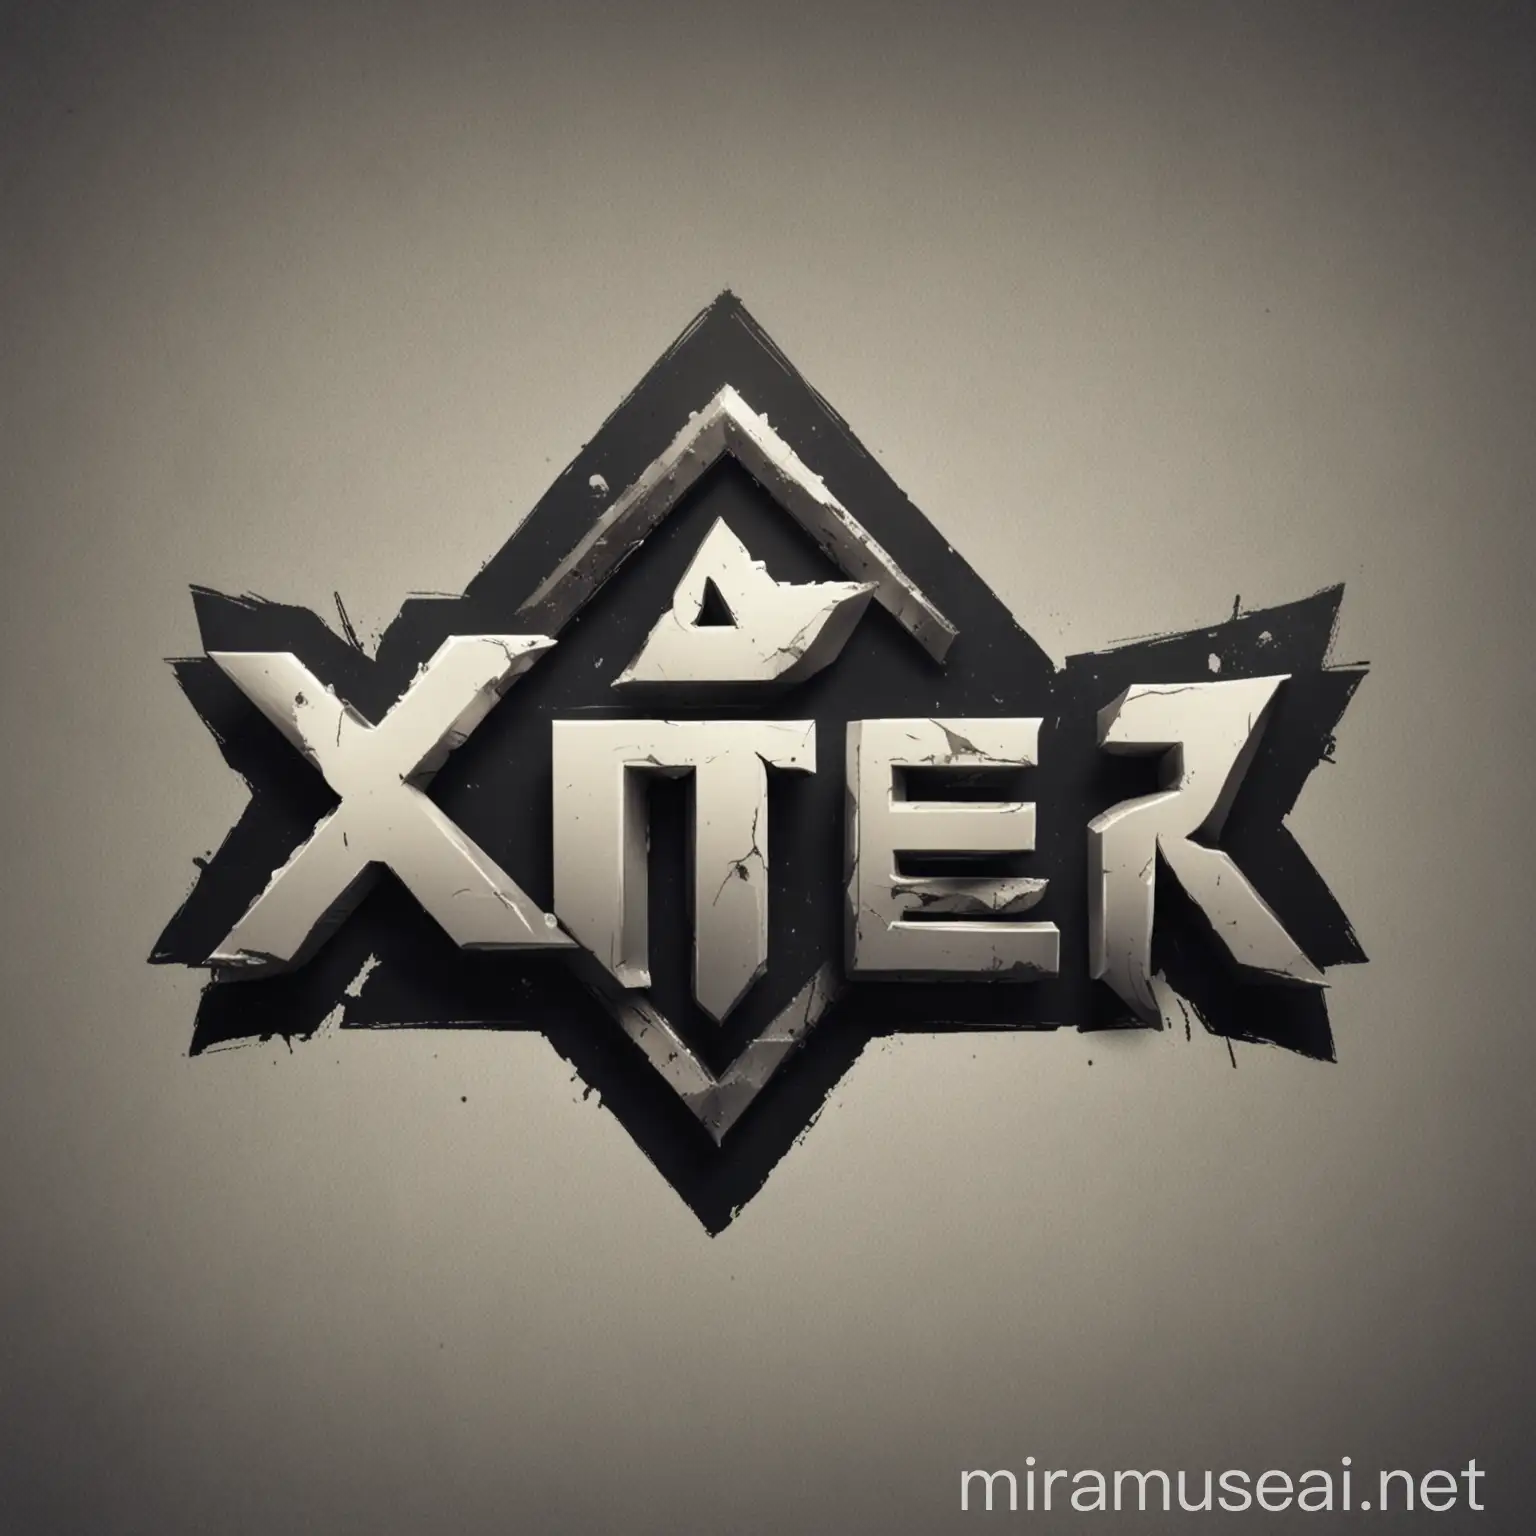 Create a logo of XTER with web 3 icon . Let there be the words XTER and XTERIOGAMES VISIBLE 